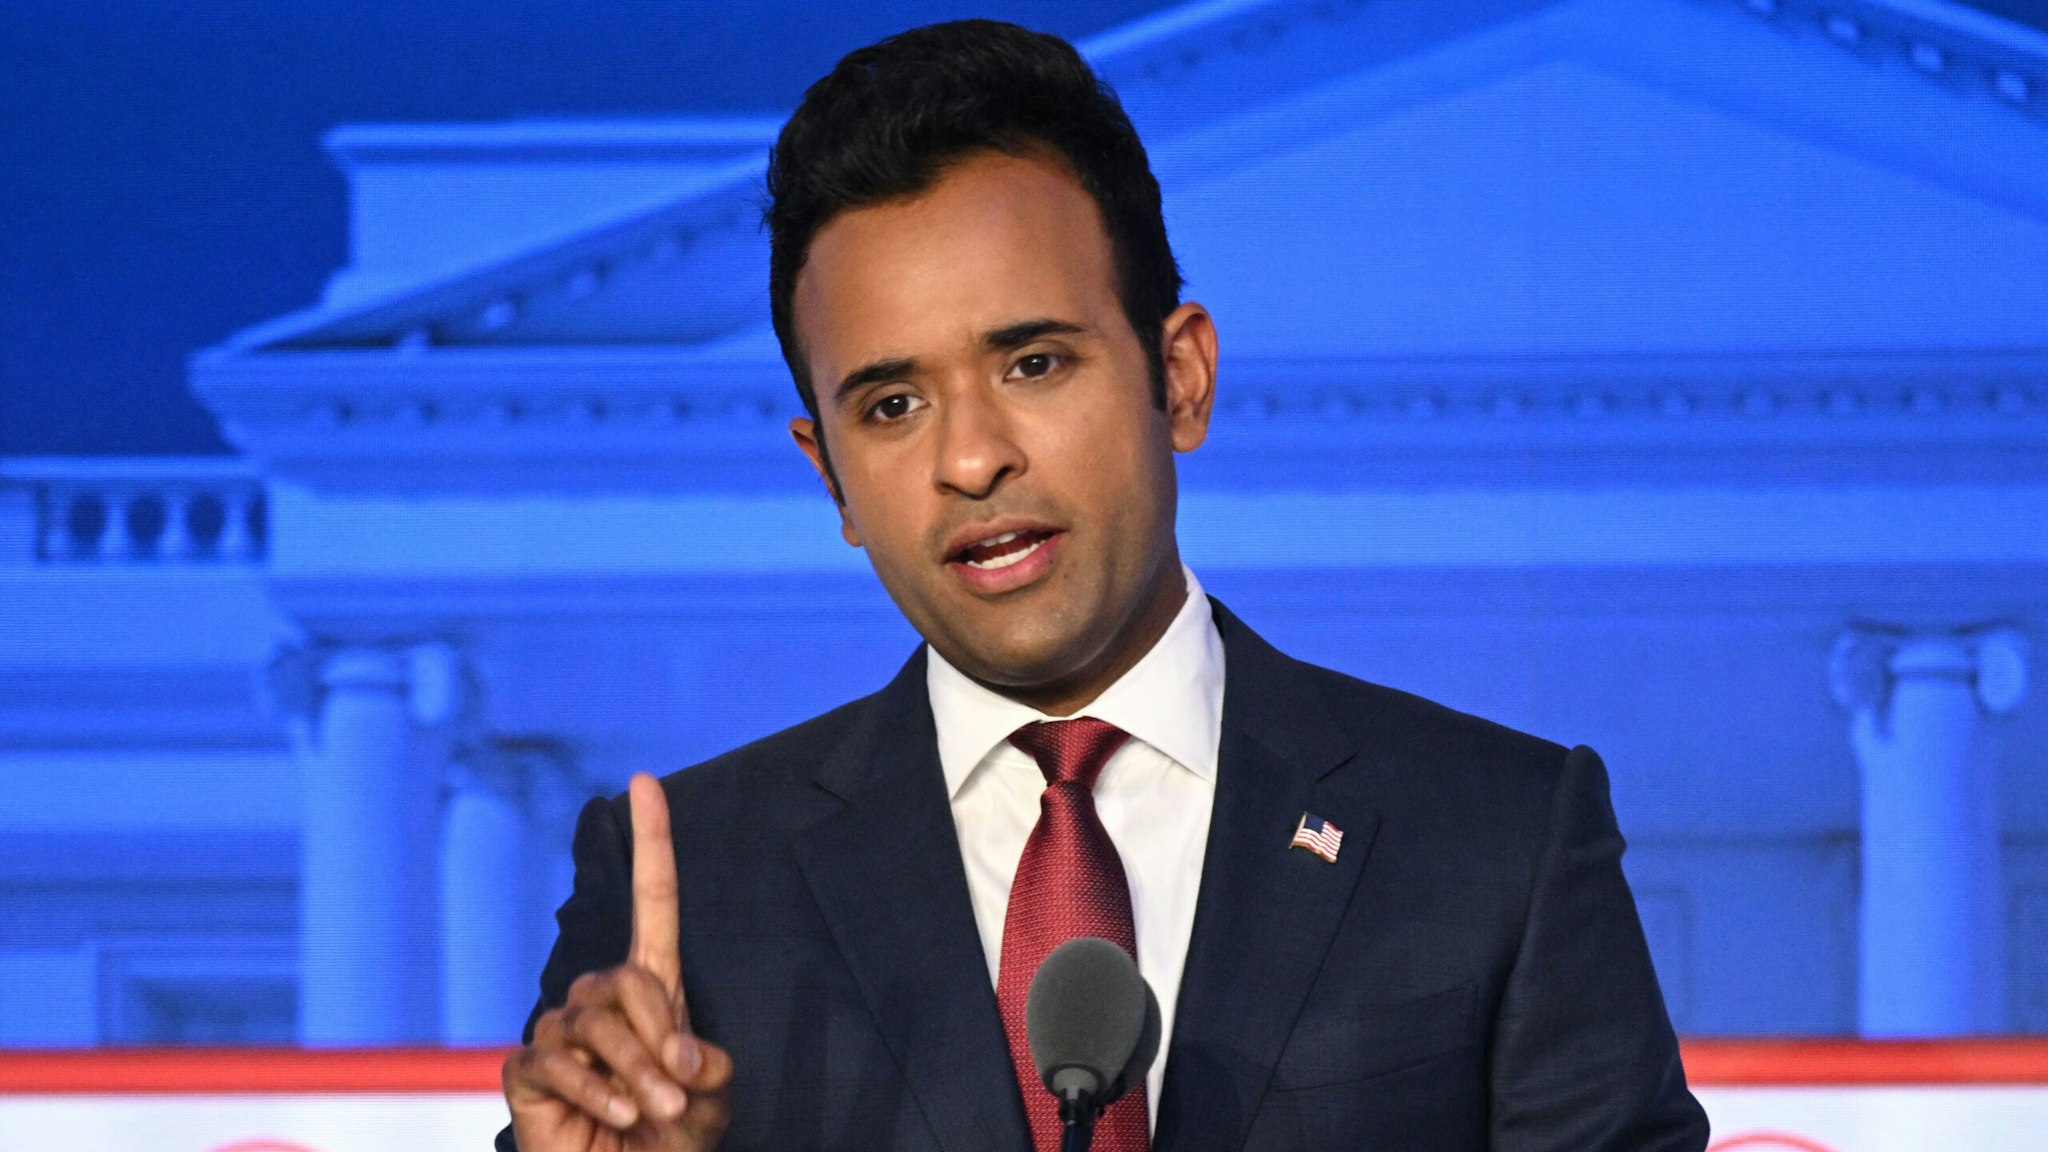 Entrepreneur Vivek Ramaswamy speaks during the second Republican presidential primary debate at the Ronald Reagan Presidential Library in Simi Valley, California, on September 27, 2023.